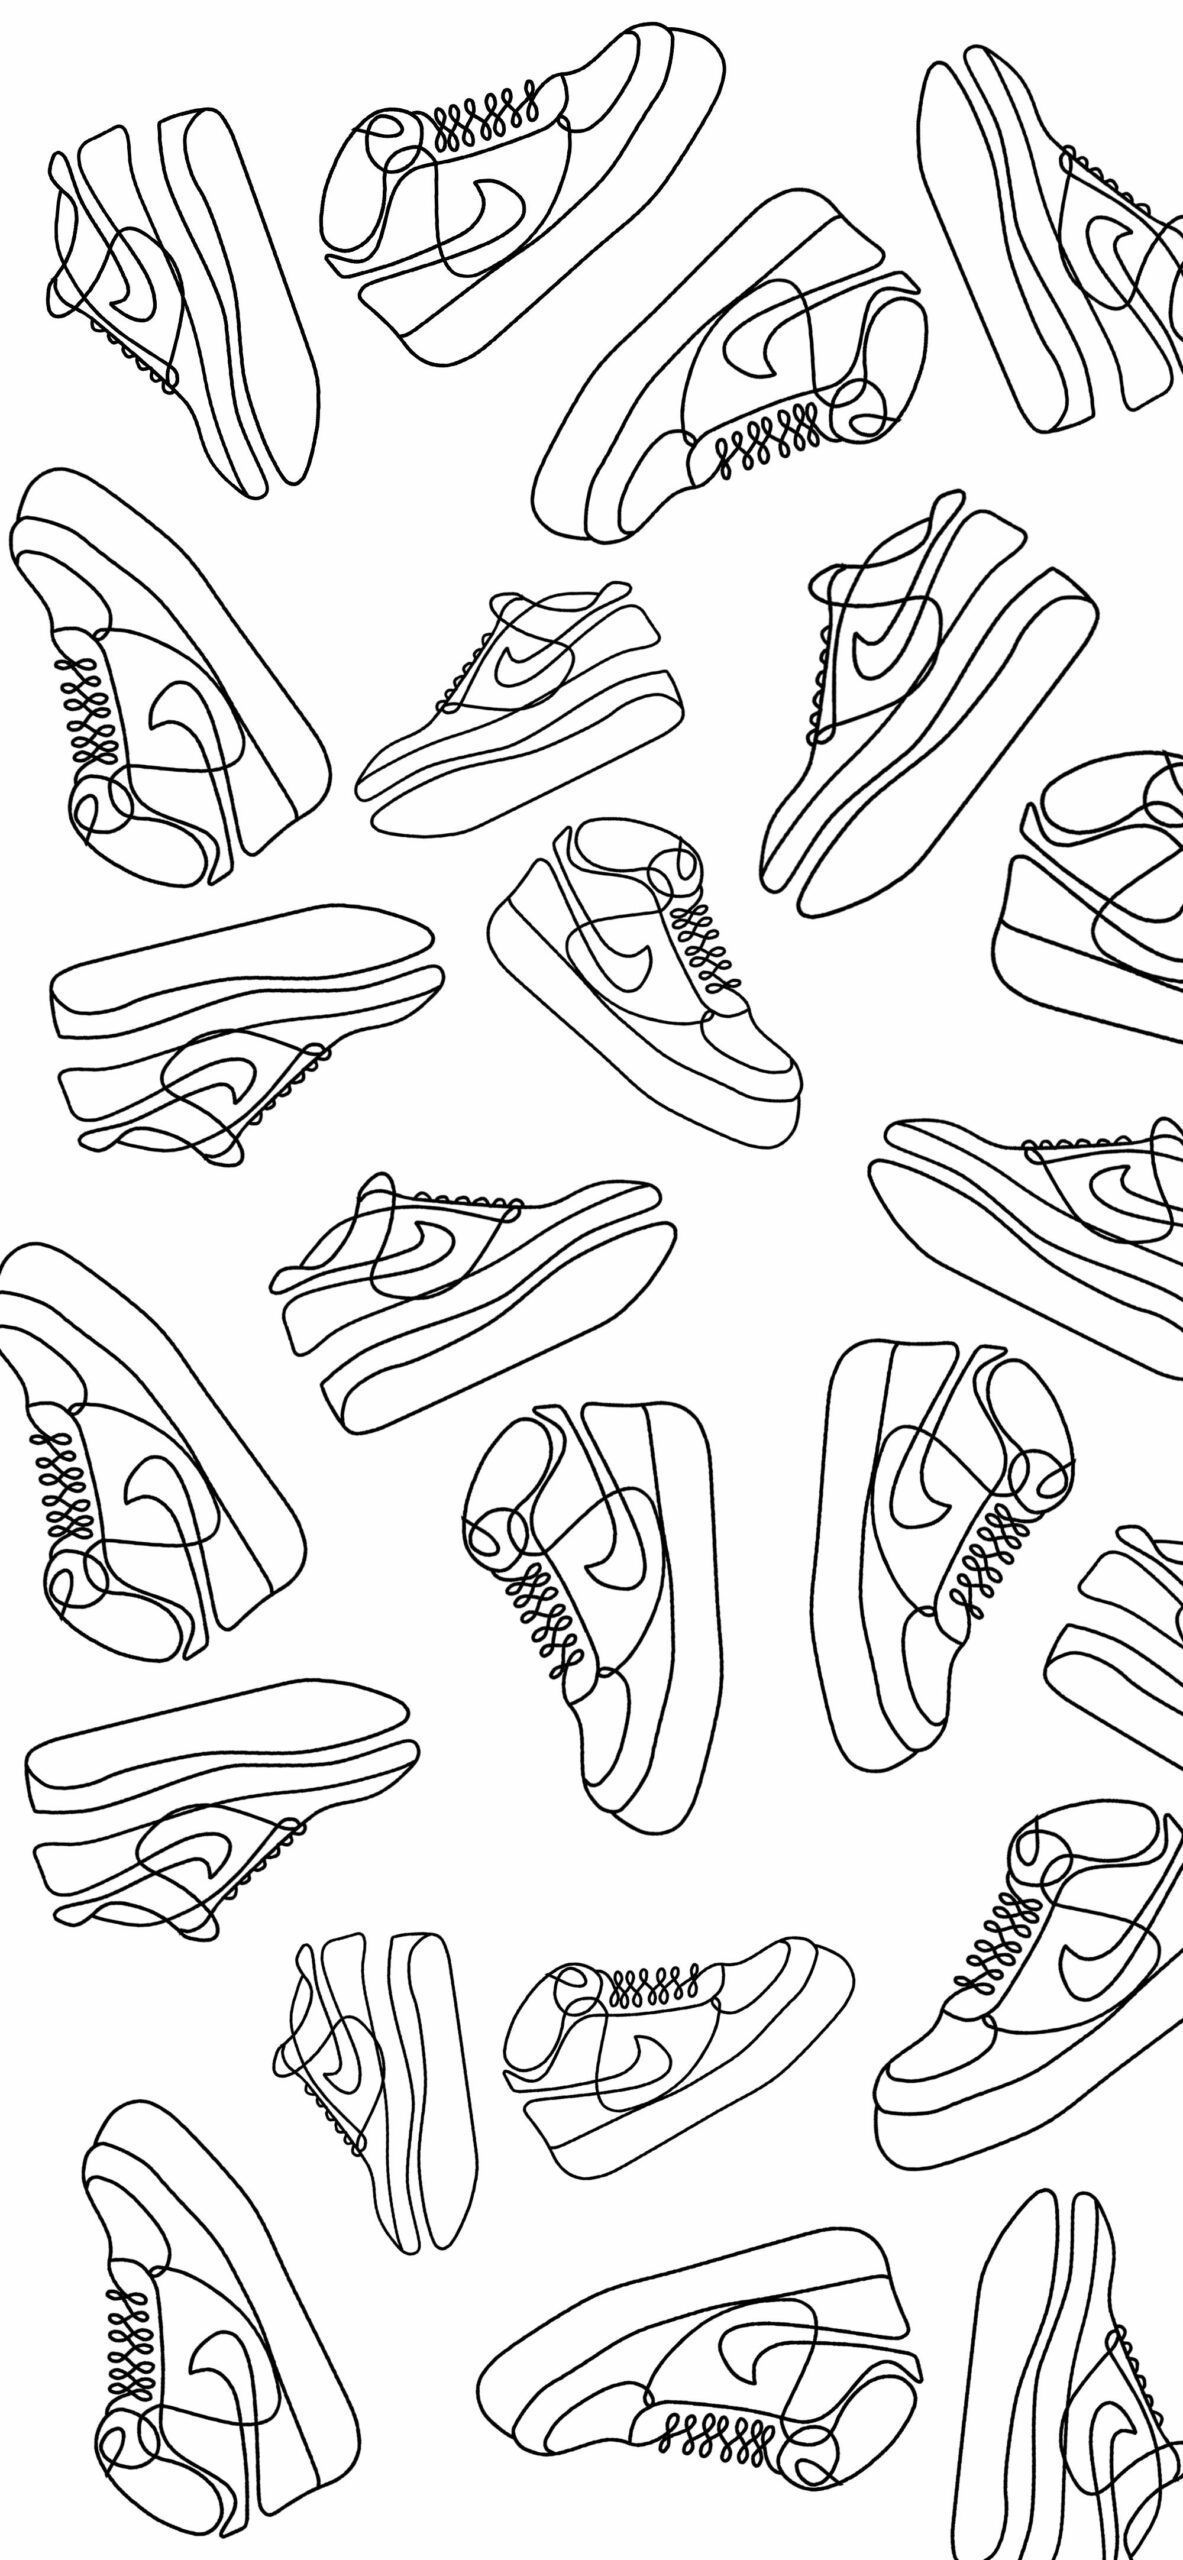 A pattern of shoes in black and white - Shoes, Nike